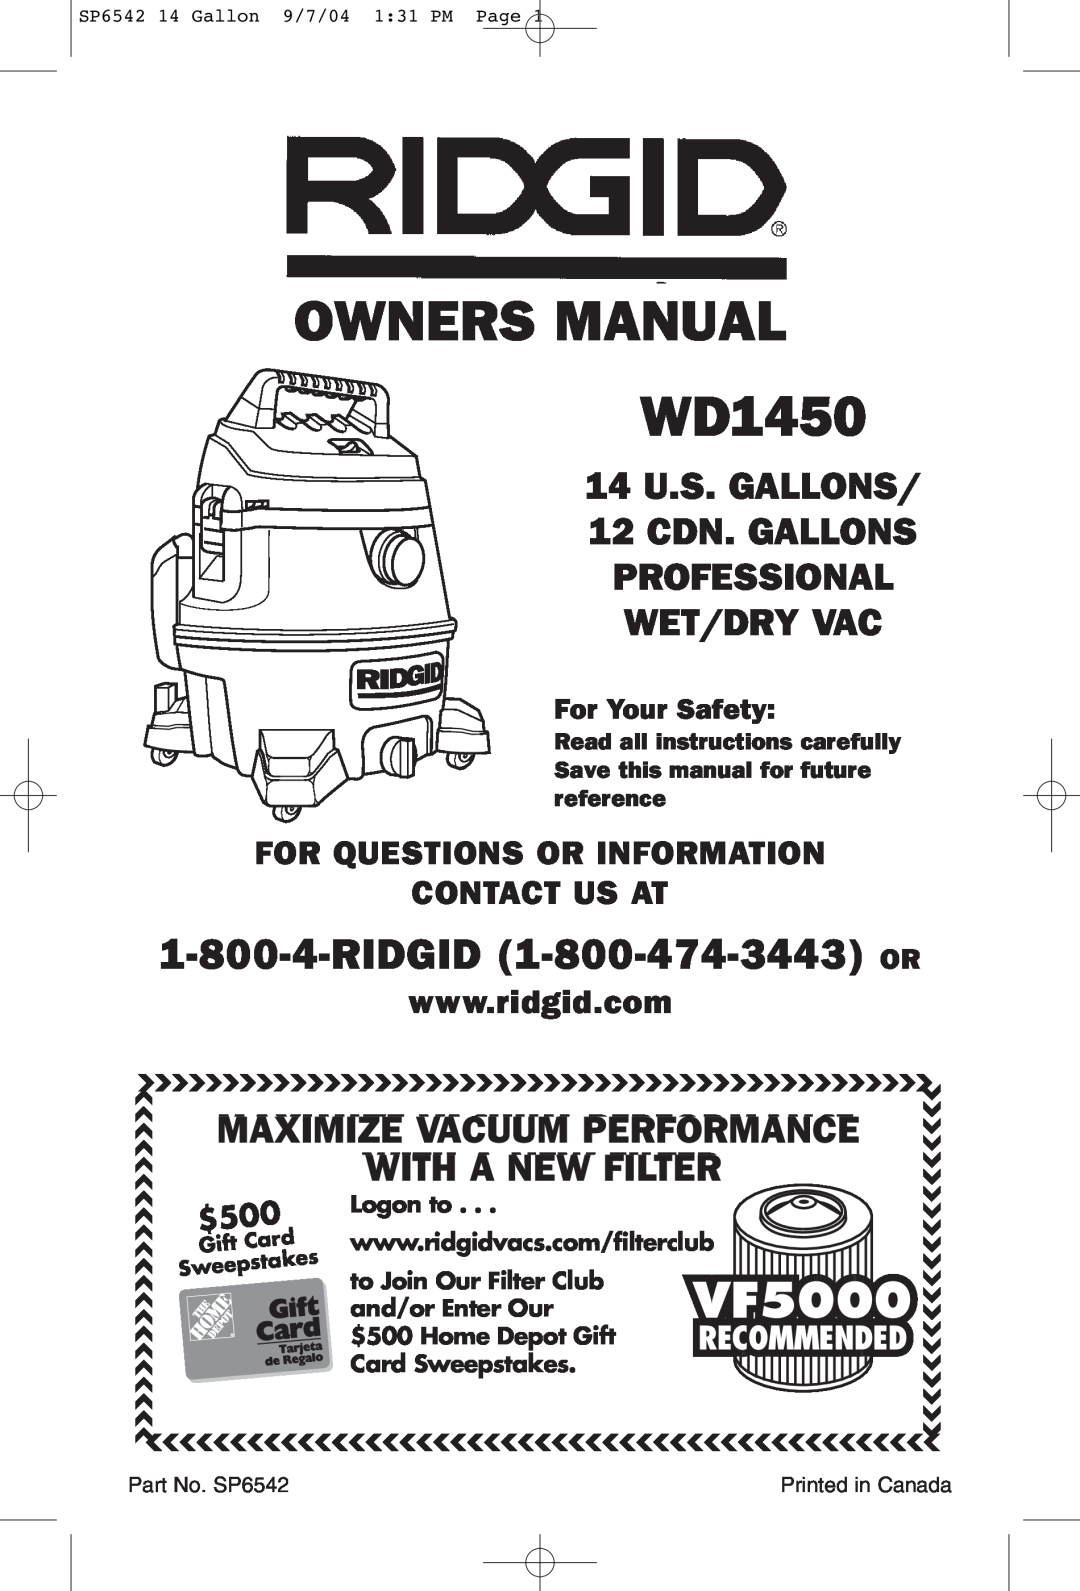 RIDGID WD1450 owner manual VF5000, Professional Wet/Dry Vac, For Questions Or Information Contact Us At, For Your Safety 